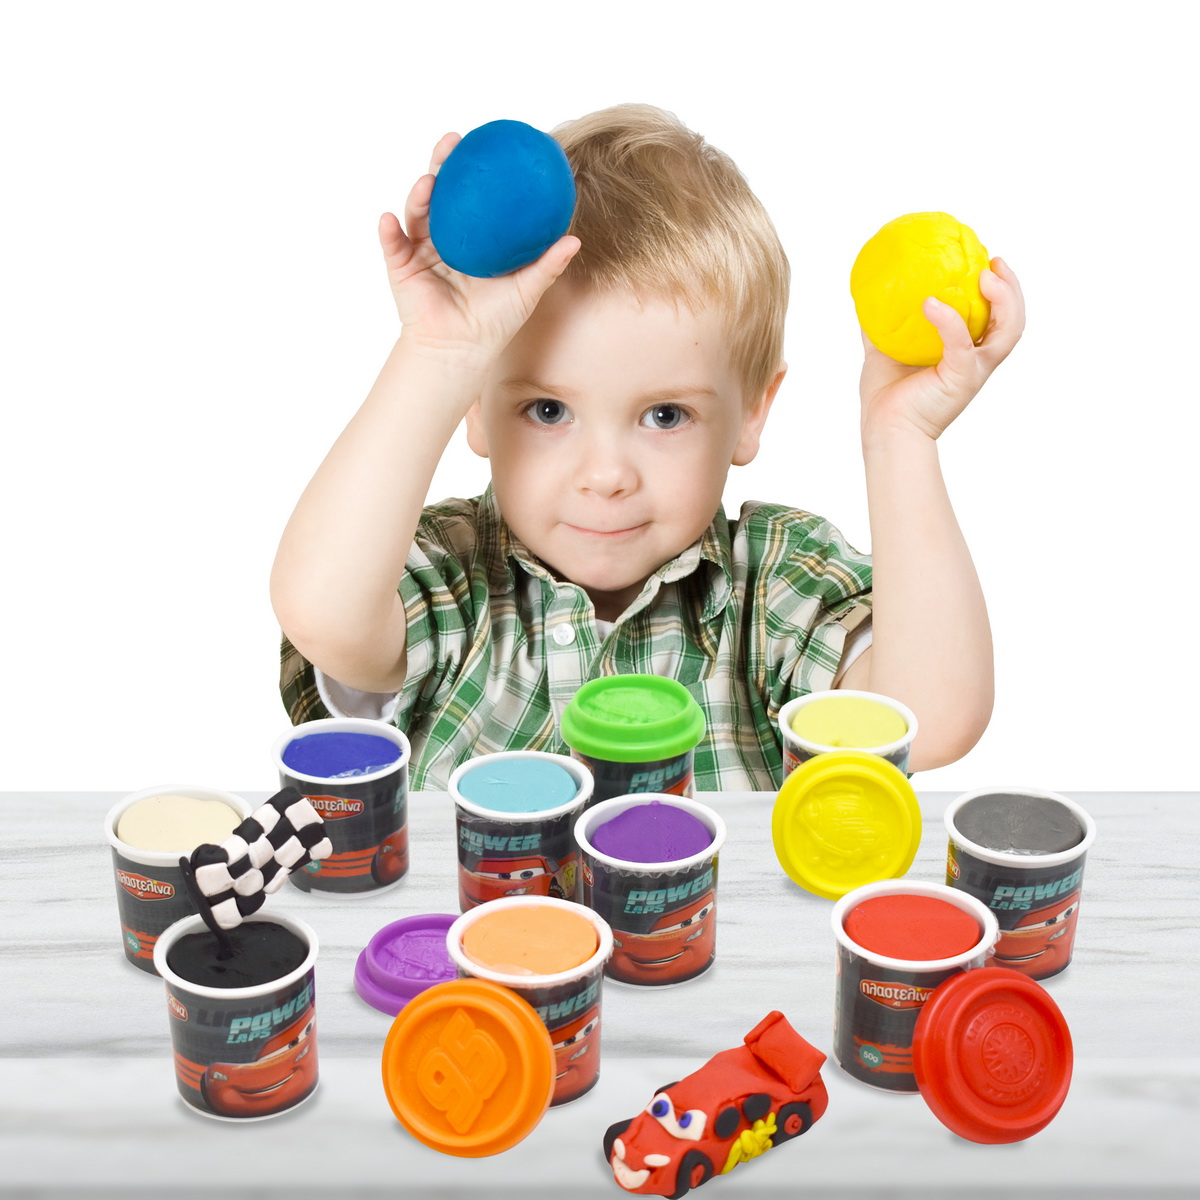 Child playing Color Plasticine, Kid molding multicolor Clay Toys Balls, white isolated